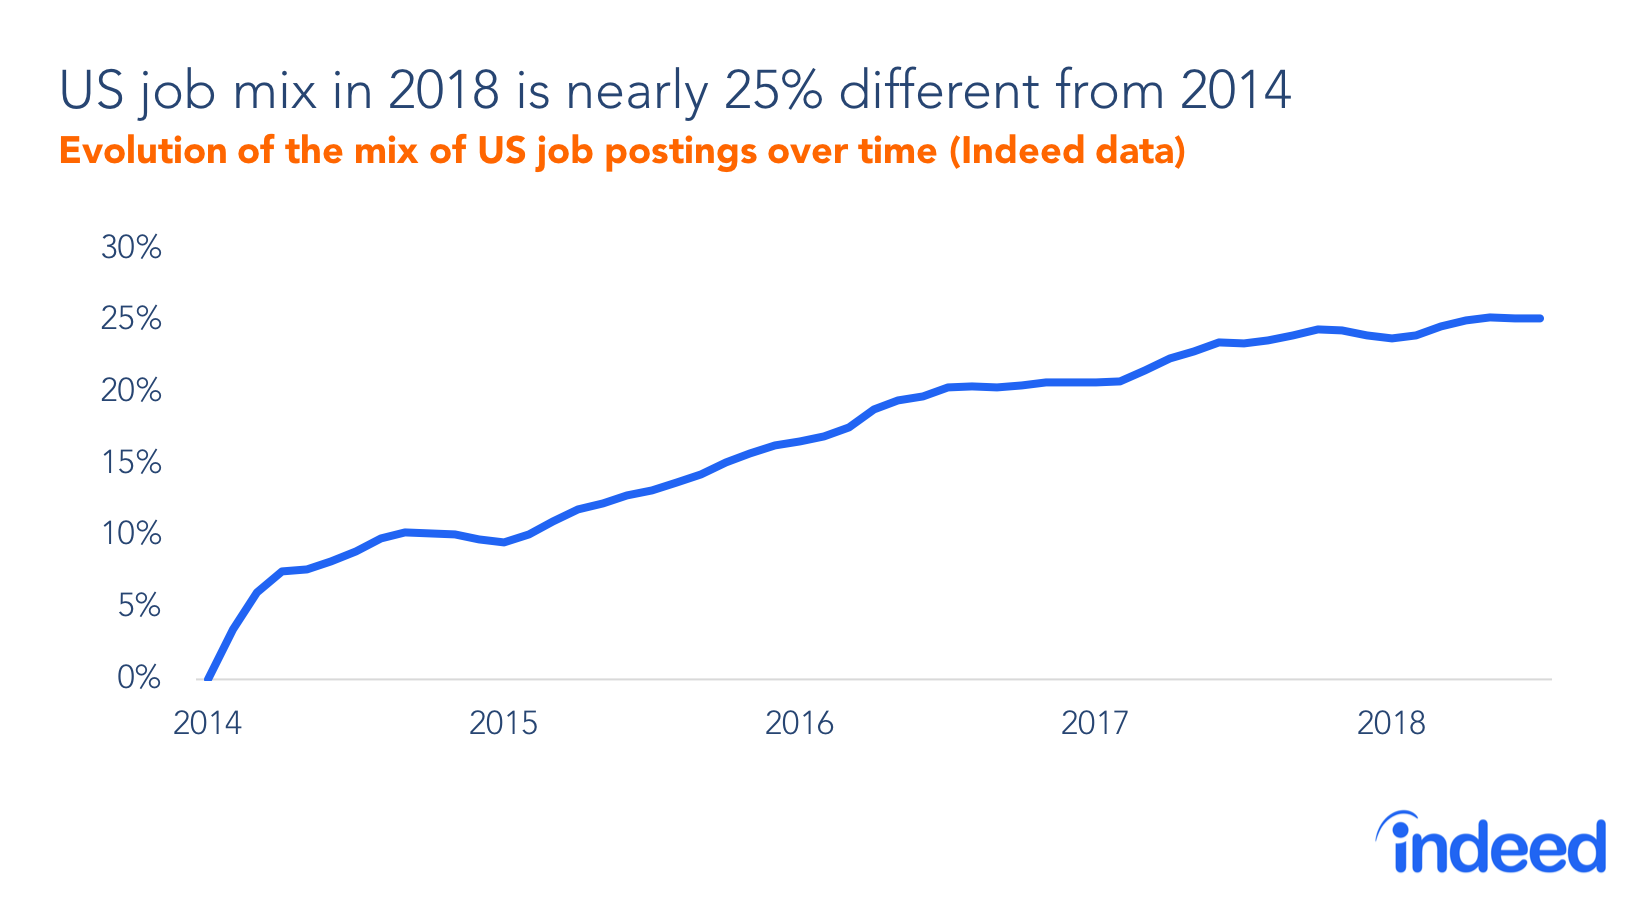 US job mix in 2018 is nearly 25% different from 2014